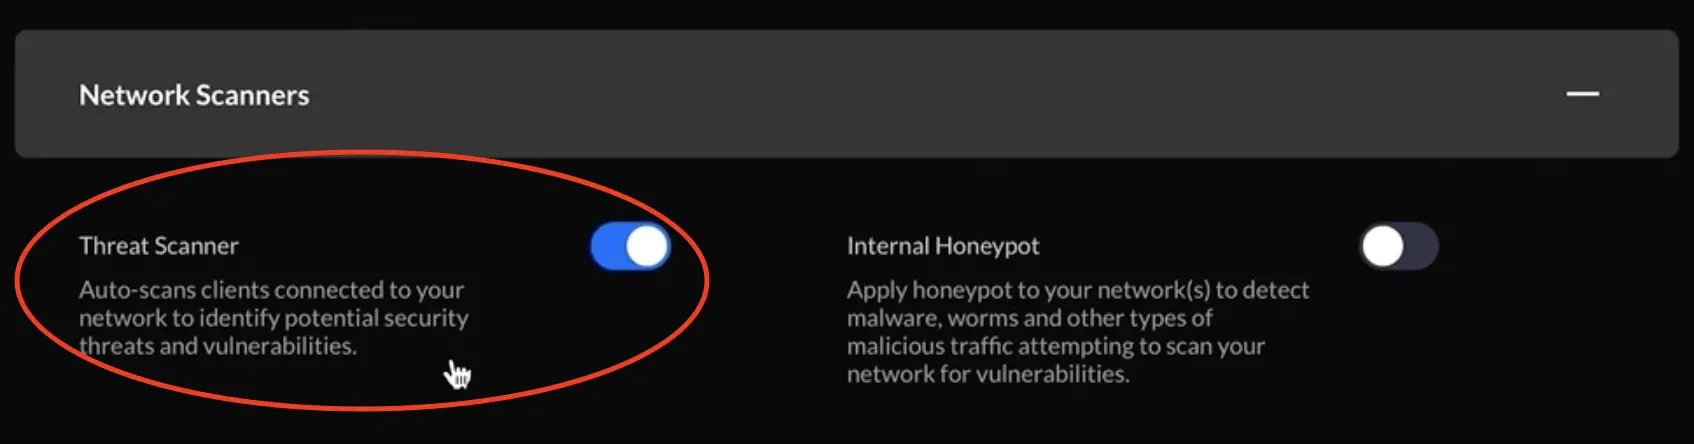 Network Scanners section that contains Threat Scanner and Internal Honeypot options.